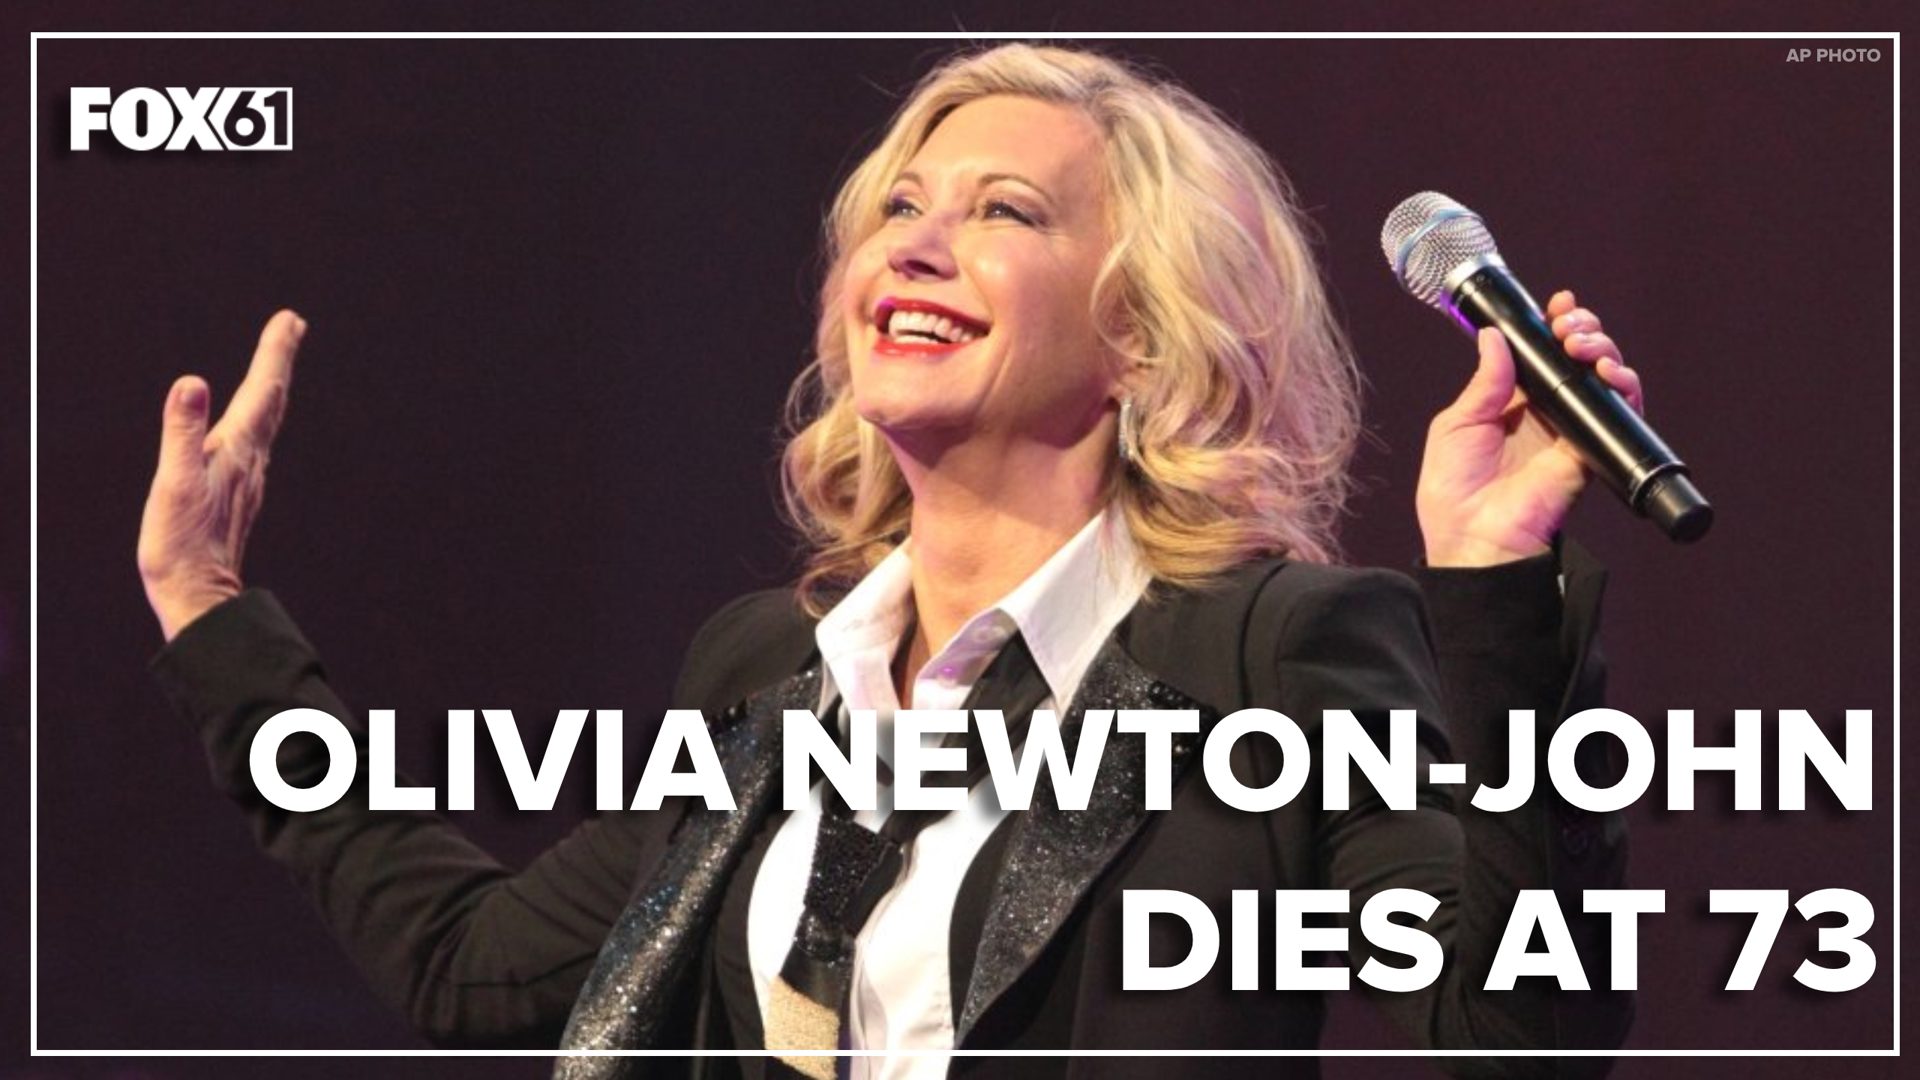 After a 30-year battle with cancer, the singer and actress passed away on Monday.